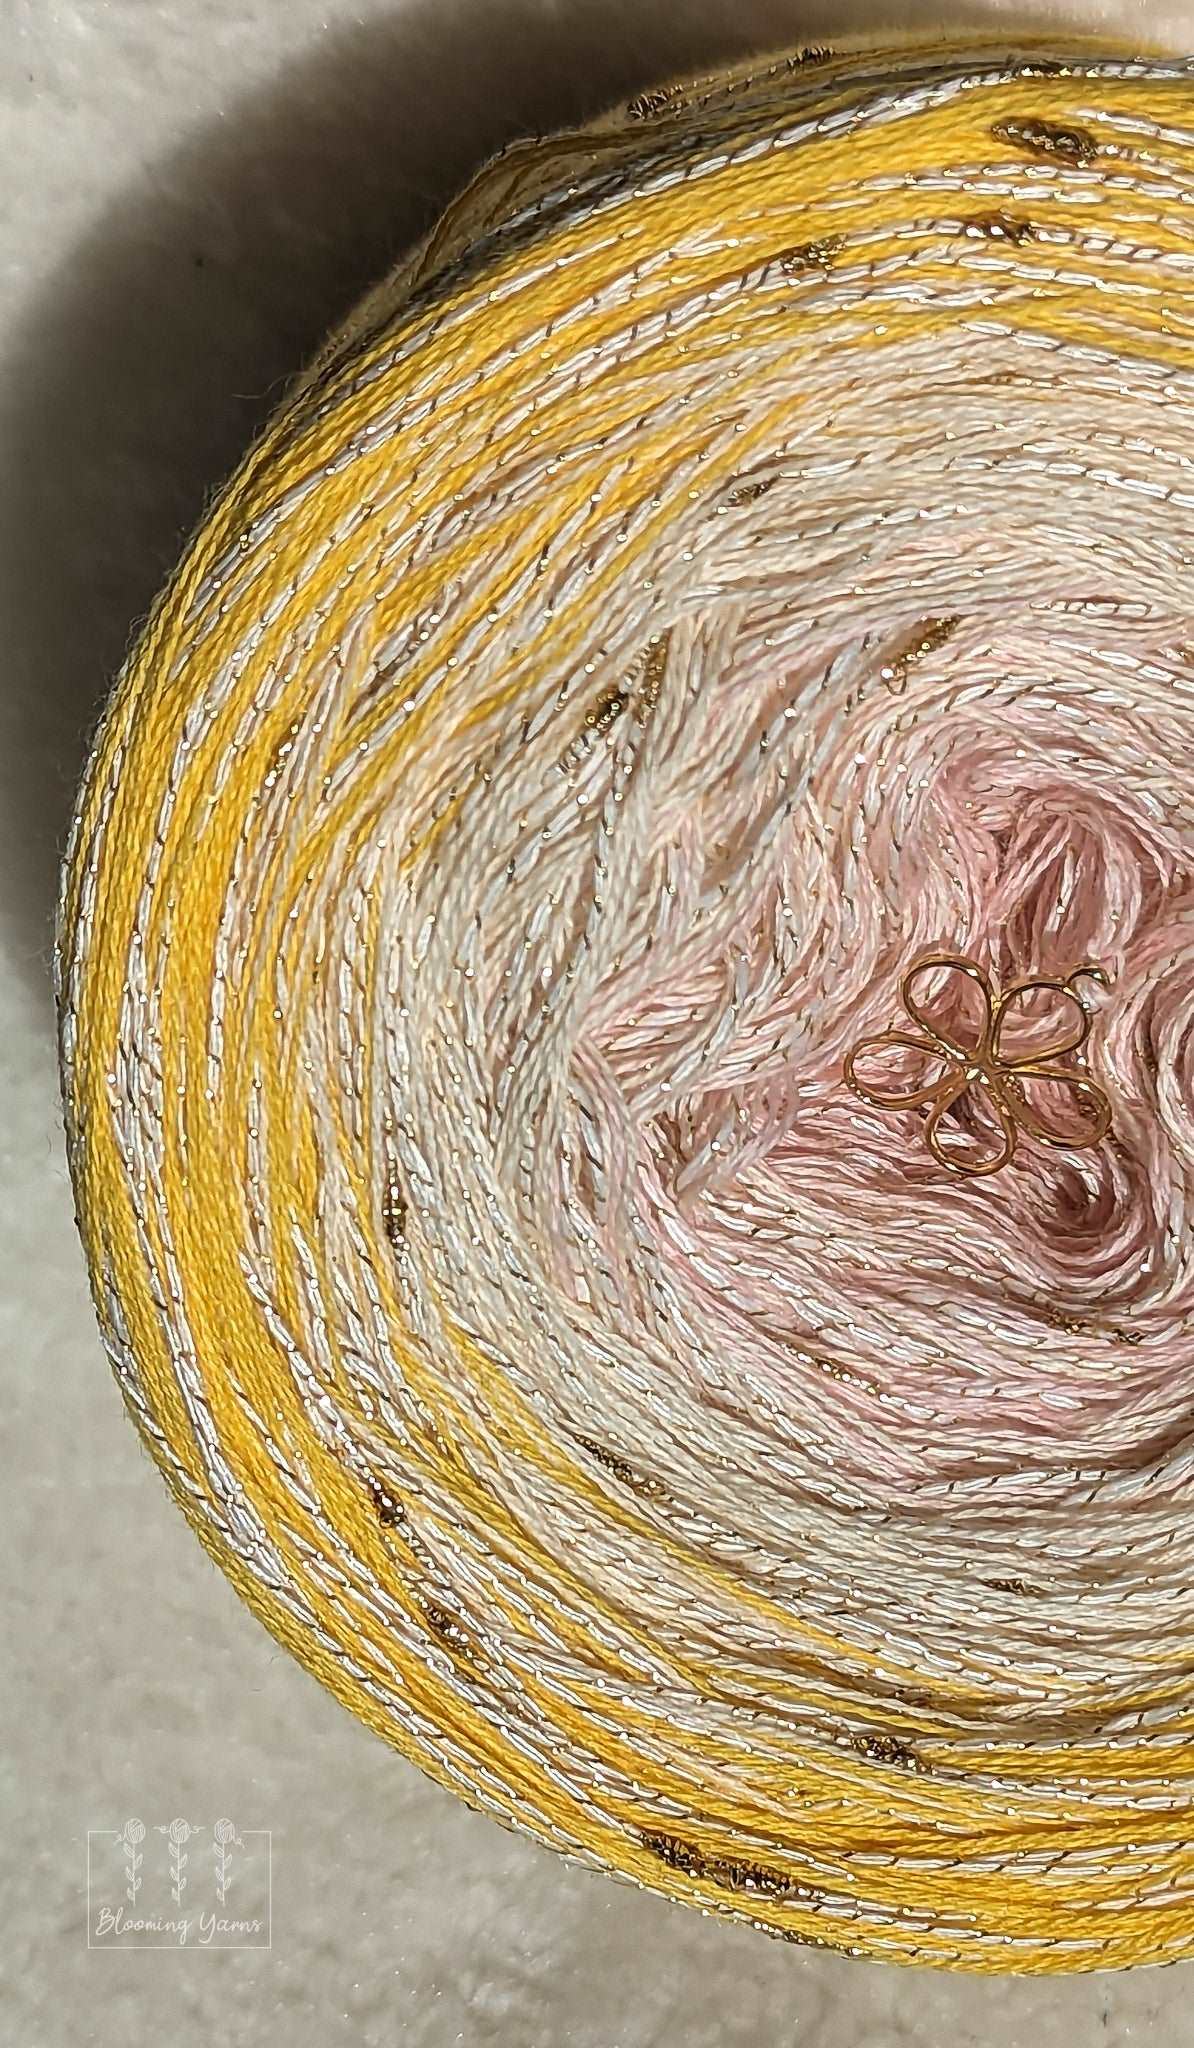 Gradient ombre yarn cake, colour combination CW017